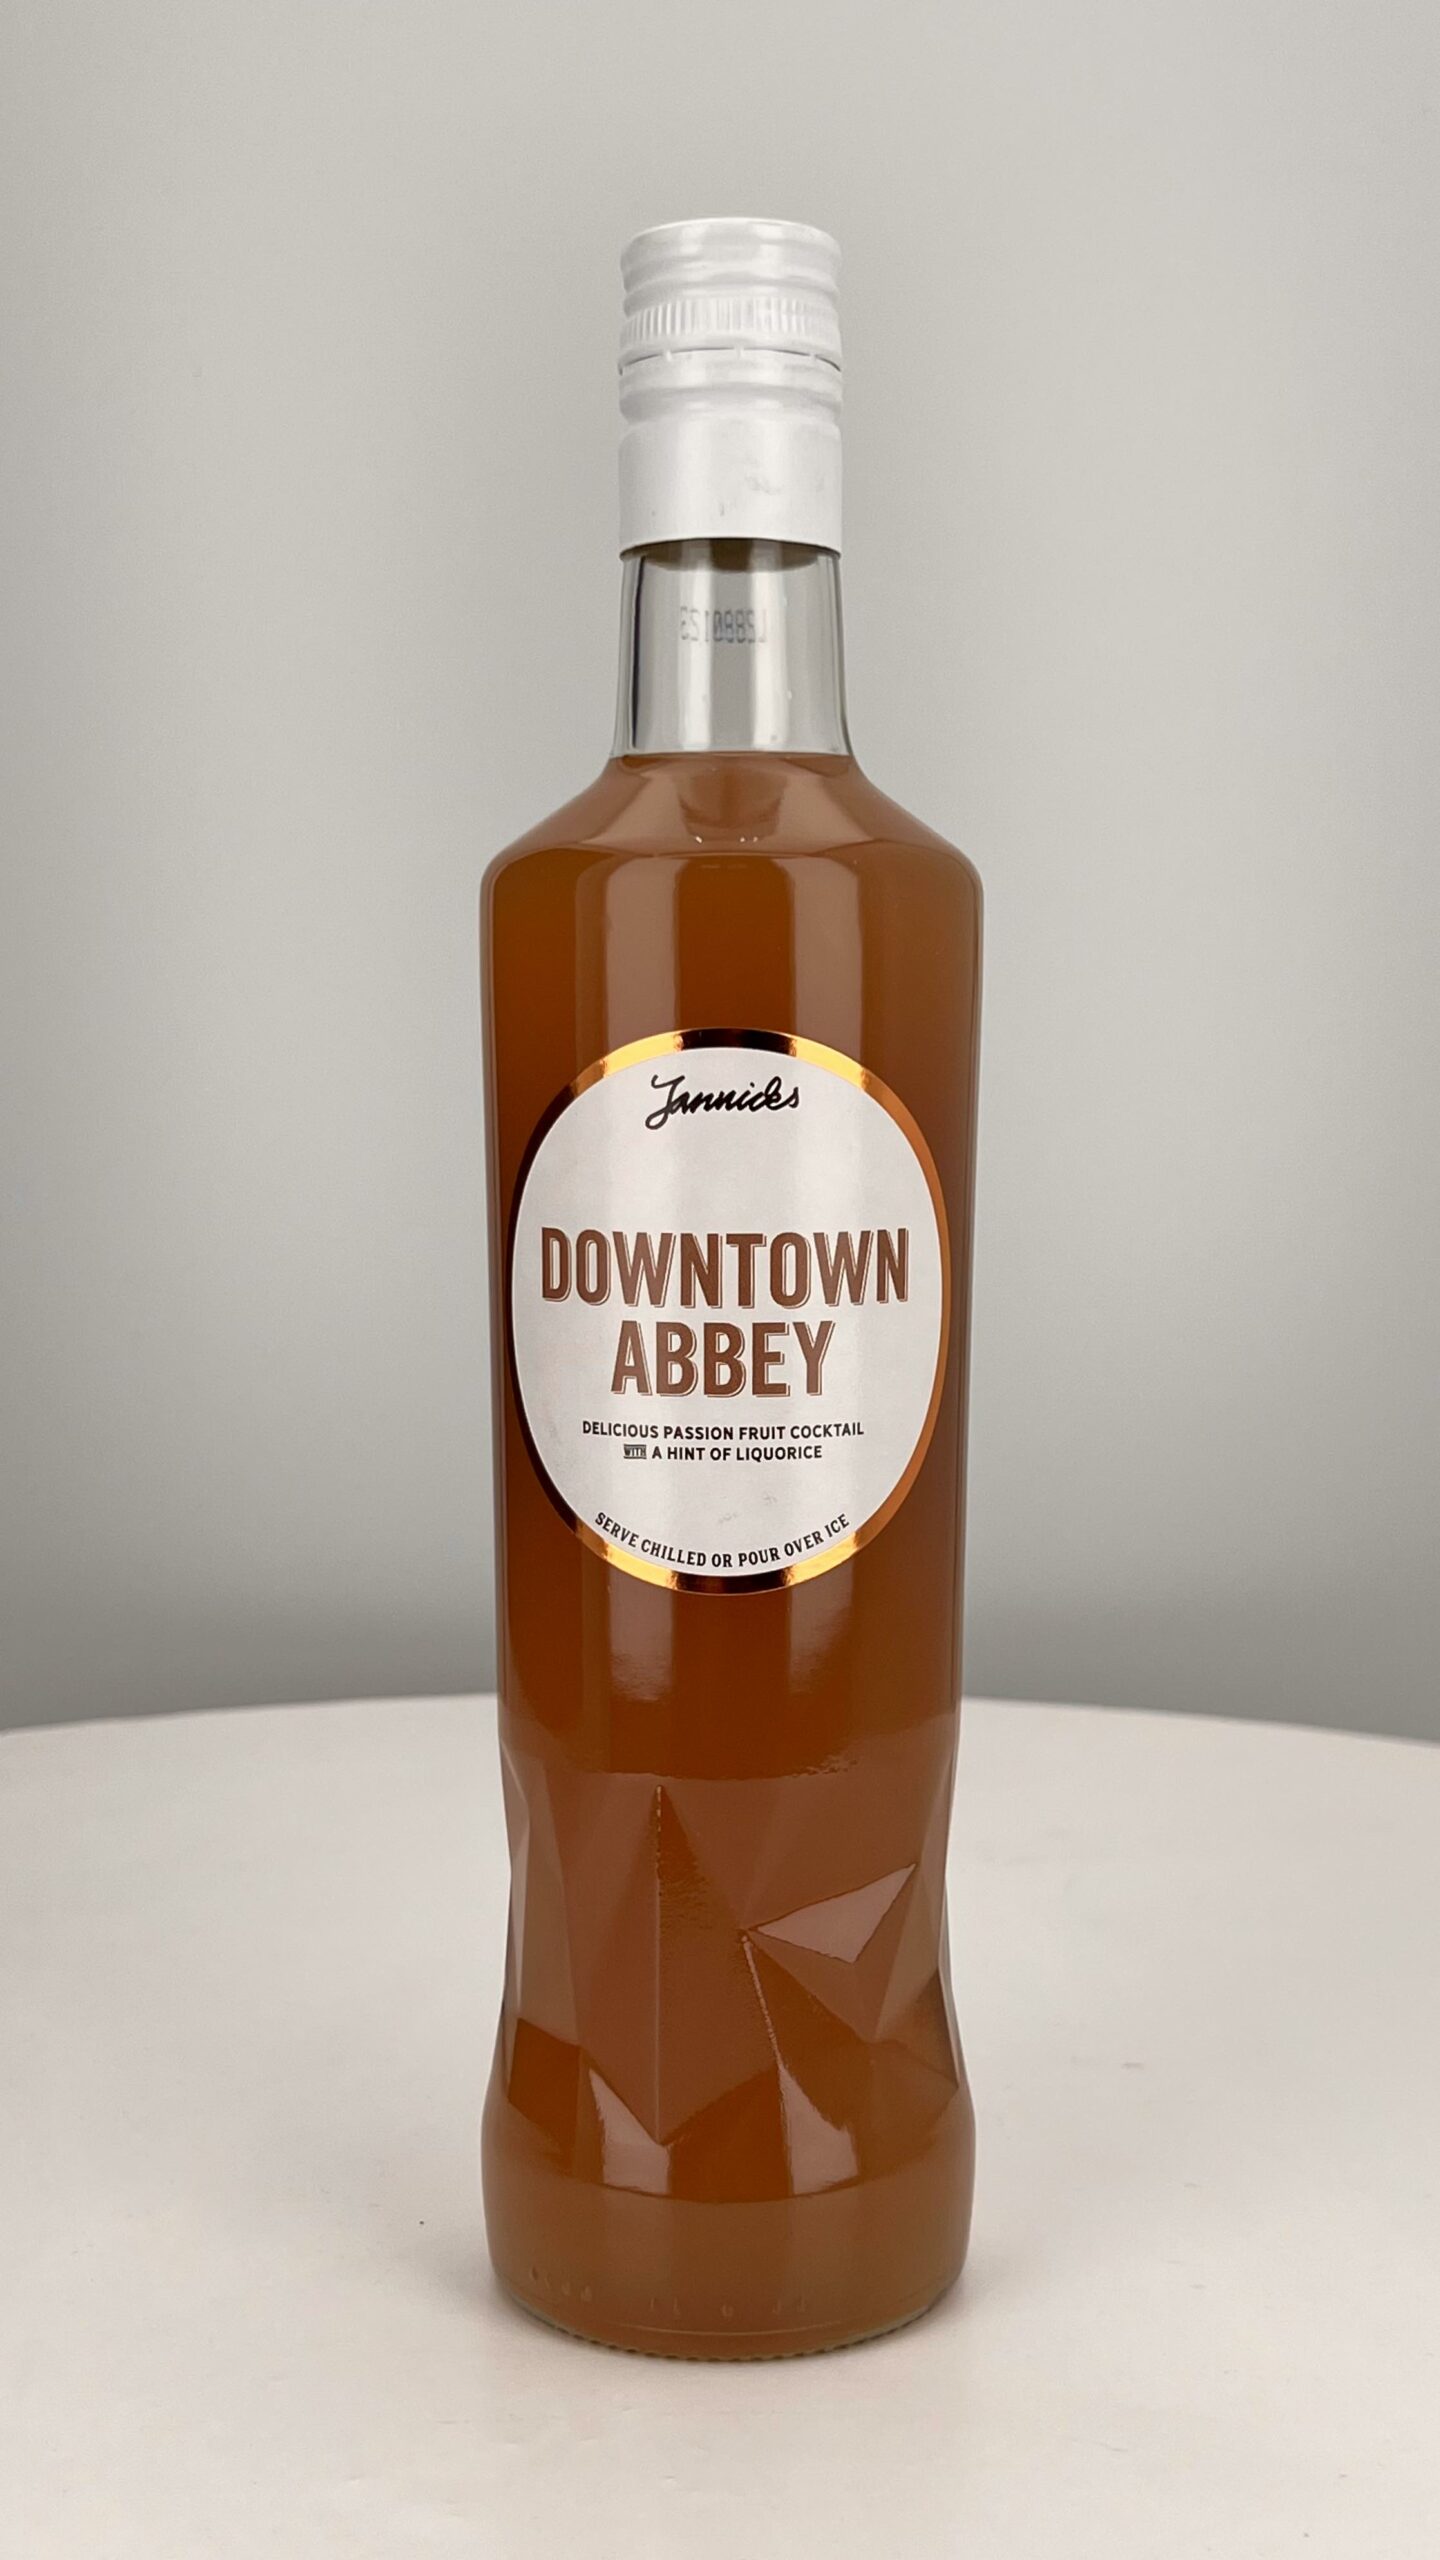 Downtown Abbey Bottled cocktail